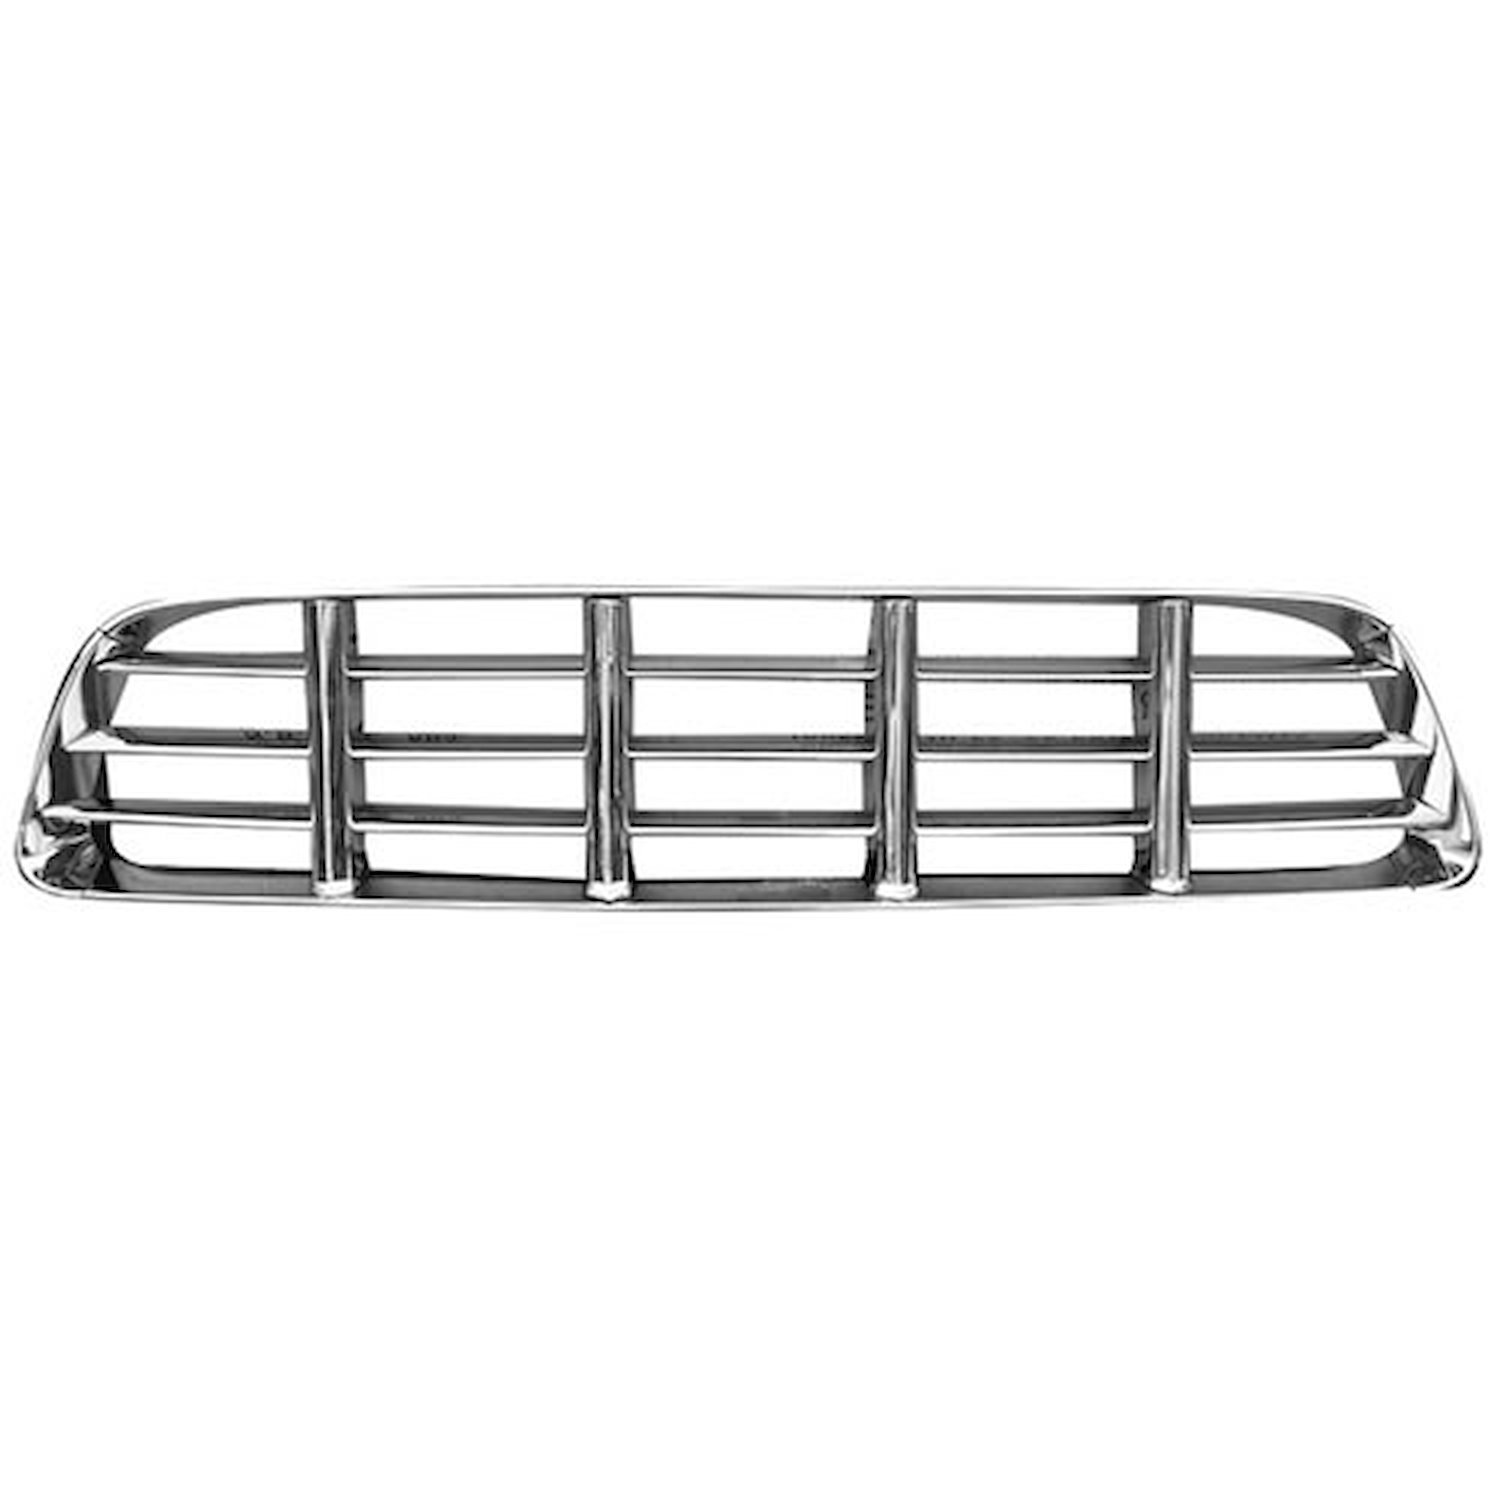 OE Reproduction Grille 1955-1956 Chevrolet Pickup Suburban